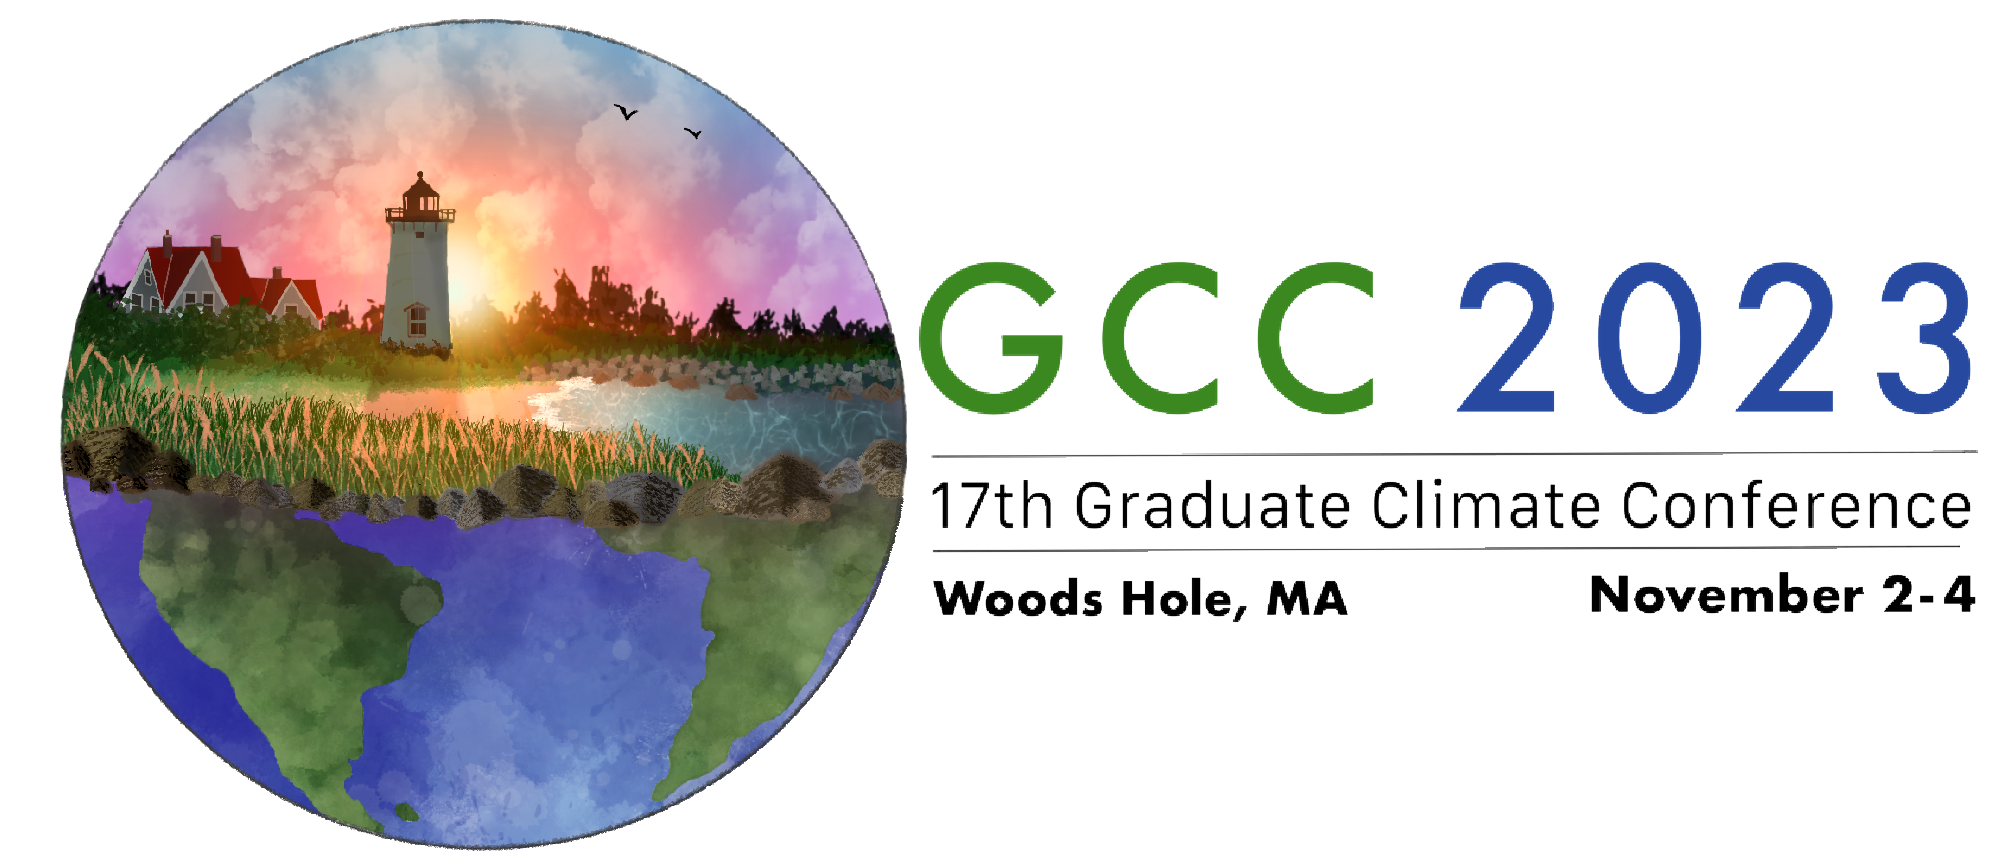 The Graduate Climate Conference Logo